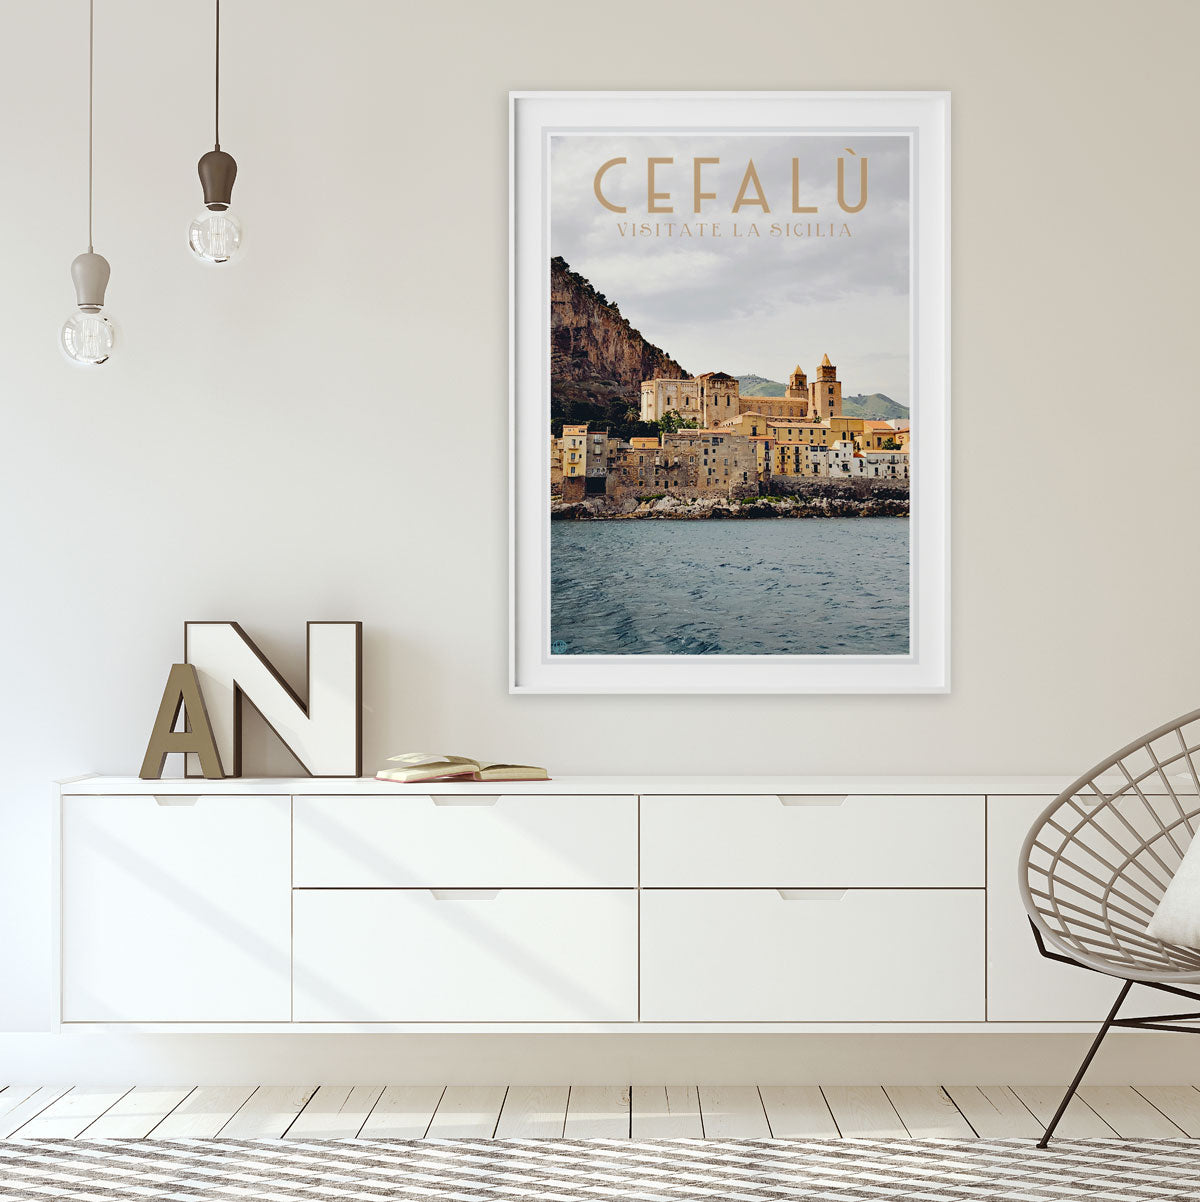 Cefalu Sicily, vintage travel style poster by places we luv